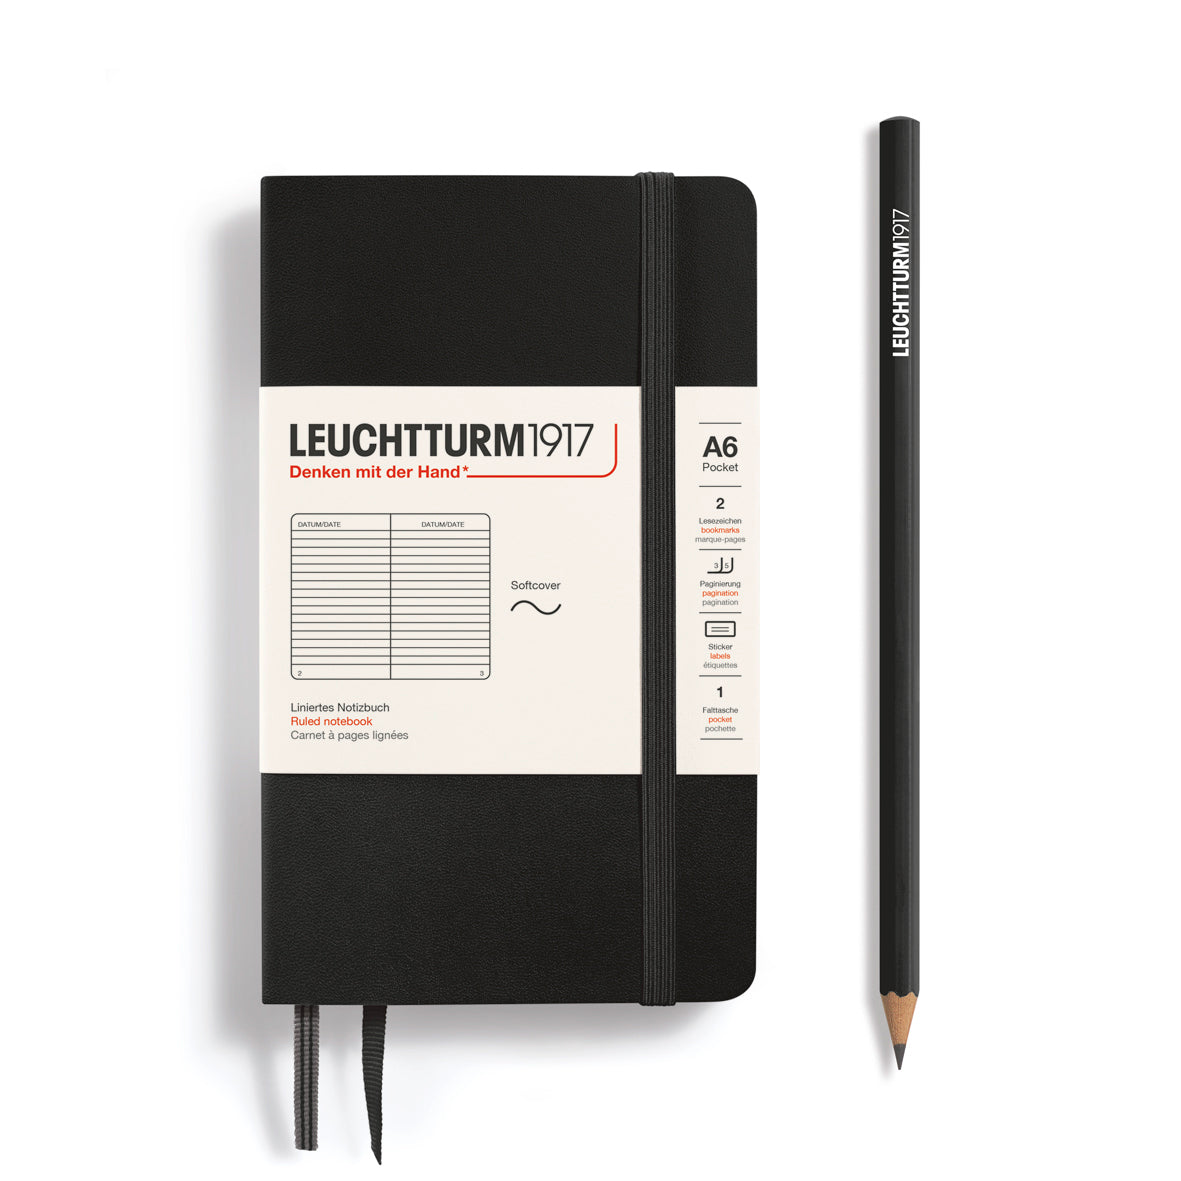 LEUCHTTURM1917 Notebook A6 Pocket Softcover in black and ruled inside at Penny Black